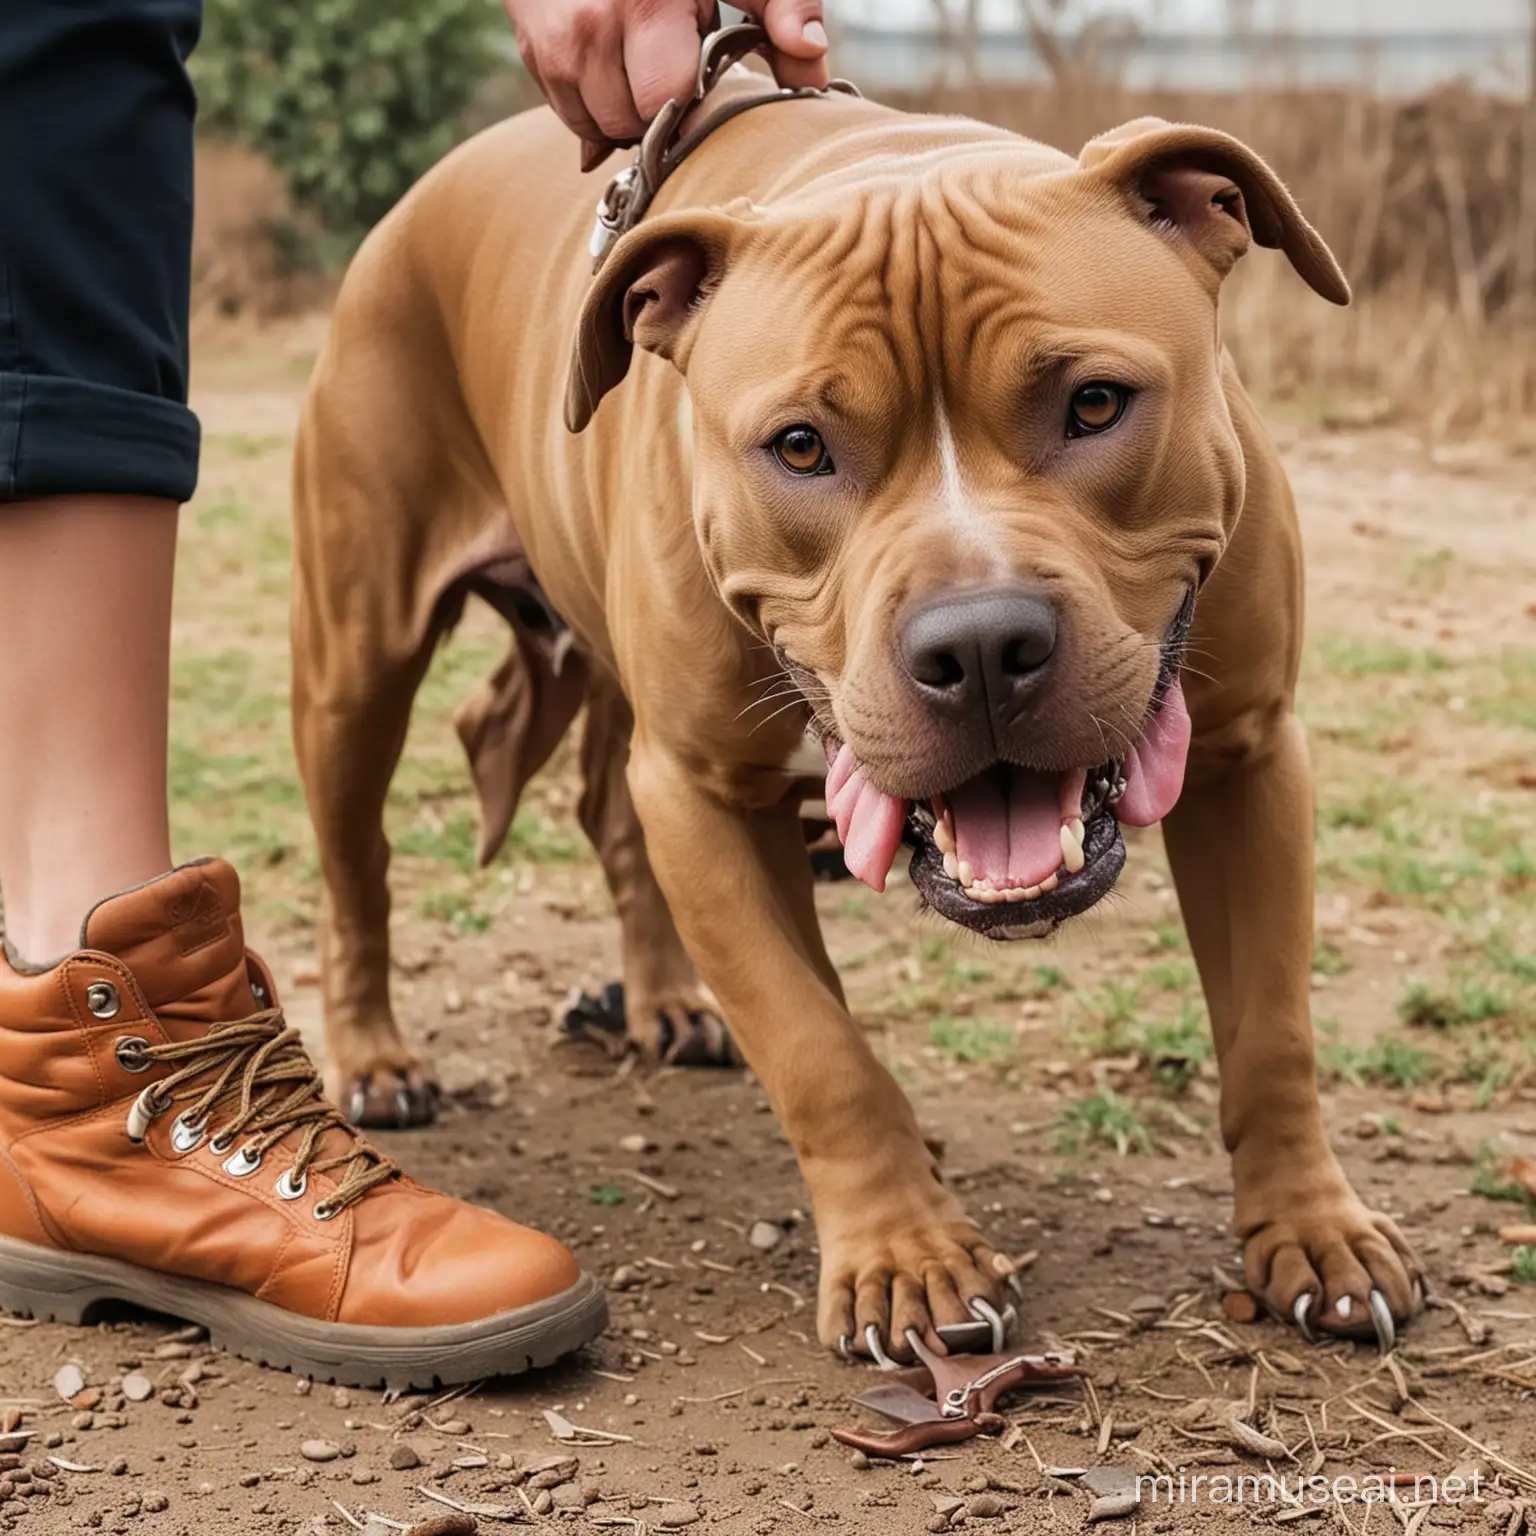 image of a pitbull with the owner's shoe in its mouth gripped hard by the teeth while the owner is trying to pull it out 